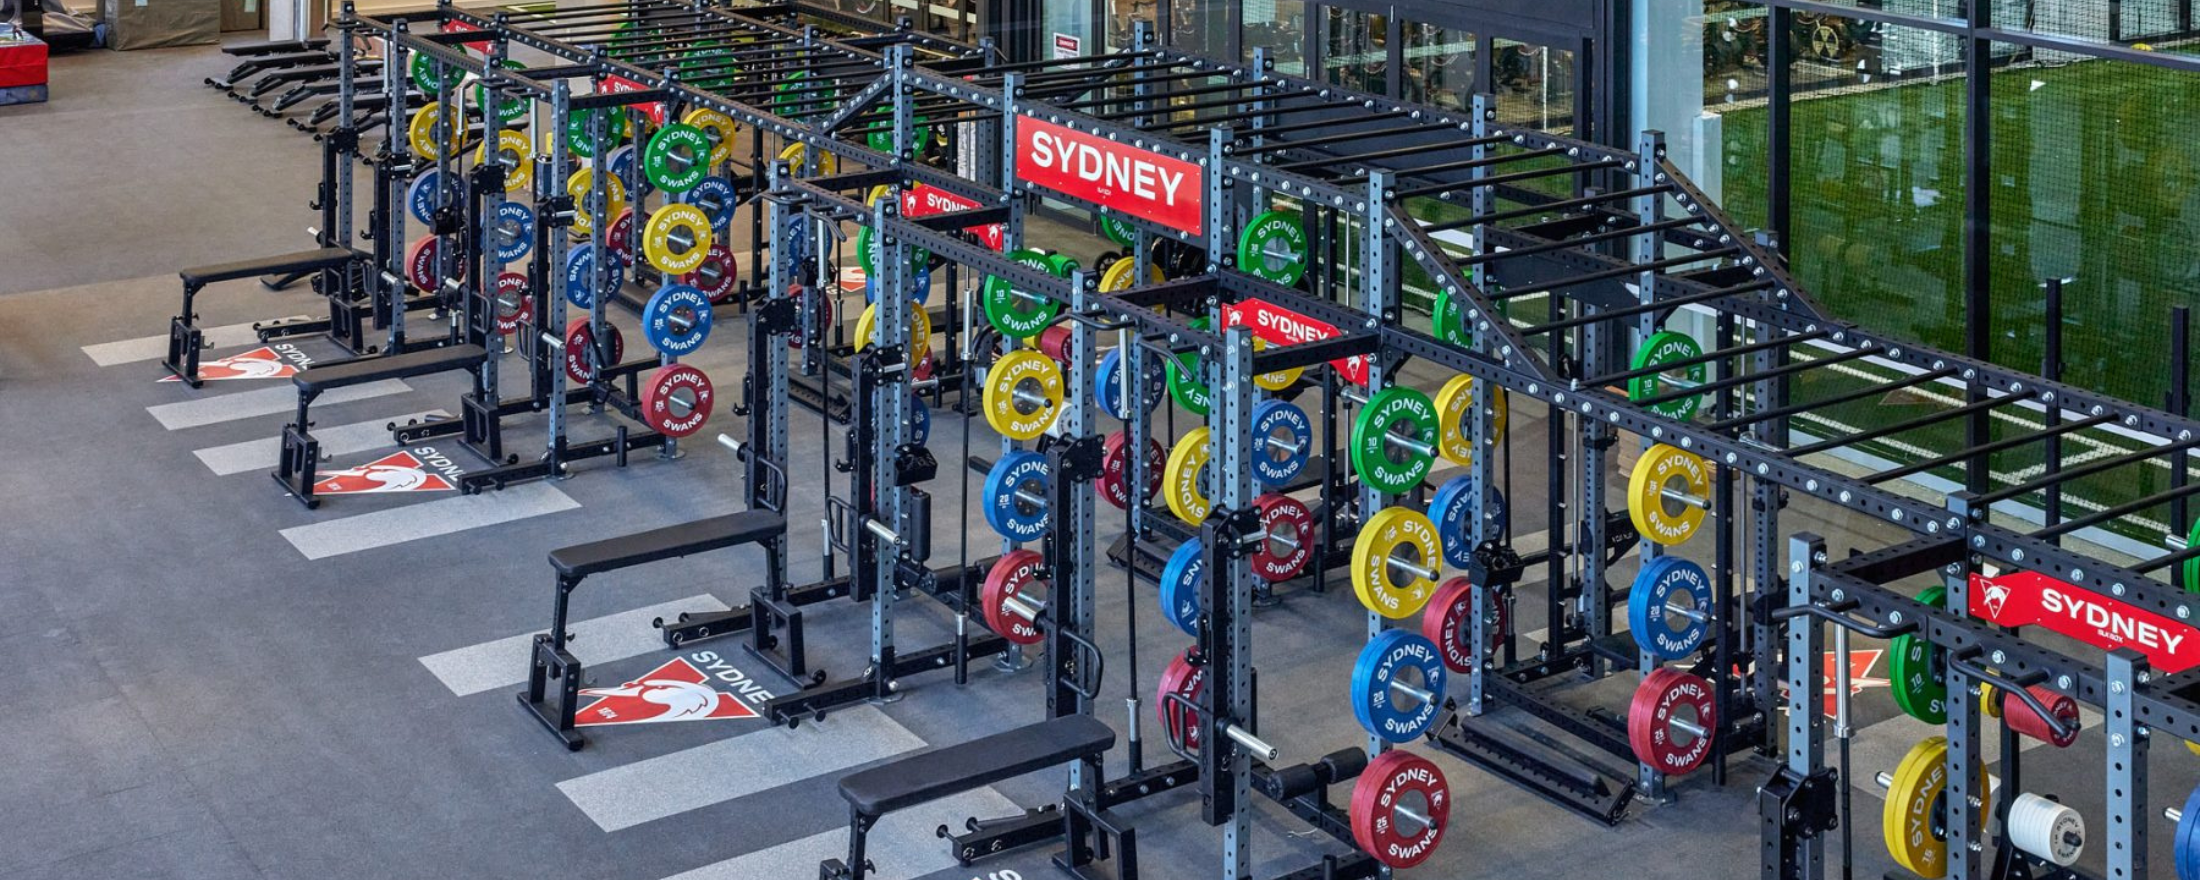 Step Inside Sydney Swans State-of-the-Art High Performance